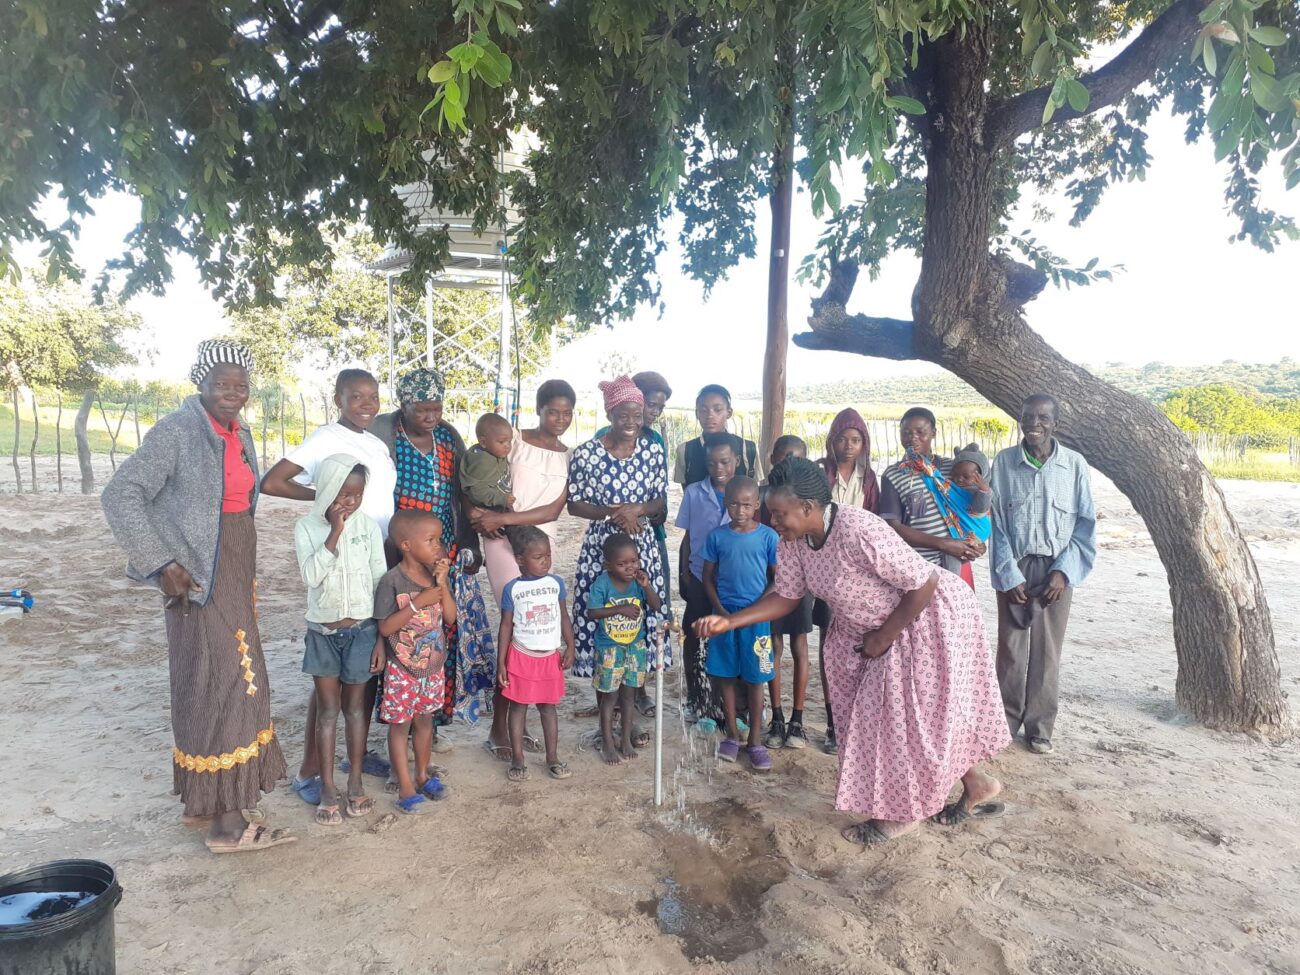 NAMIBIA: Village receives vital access to clean water